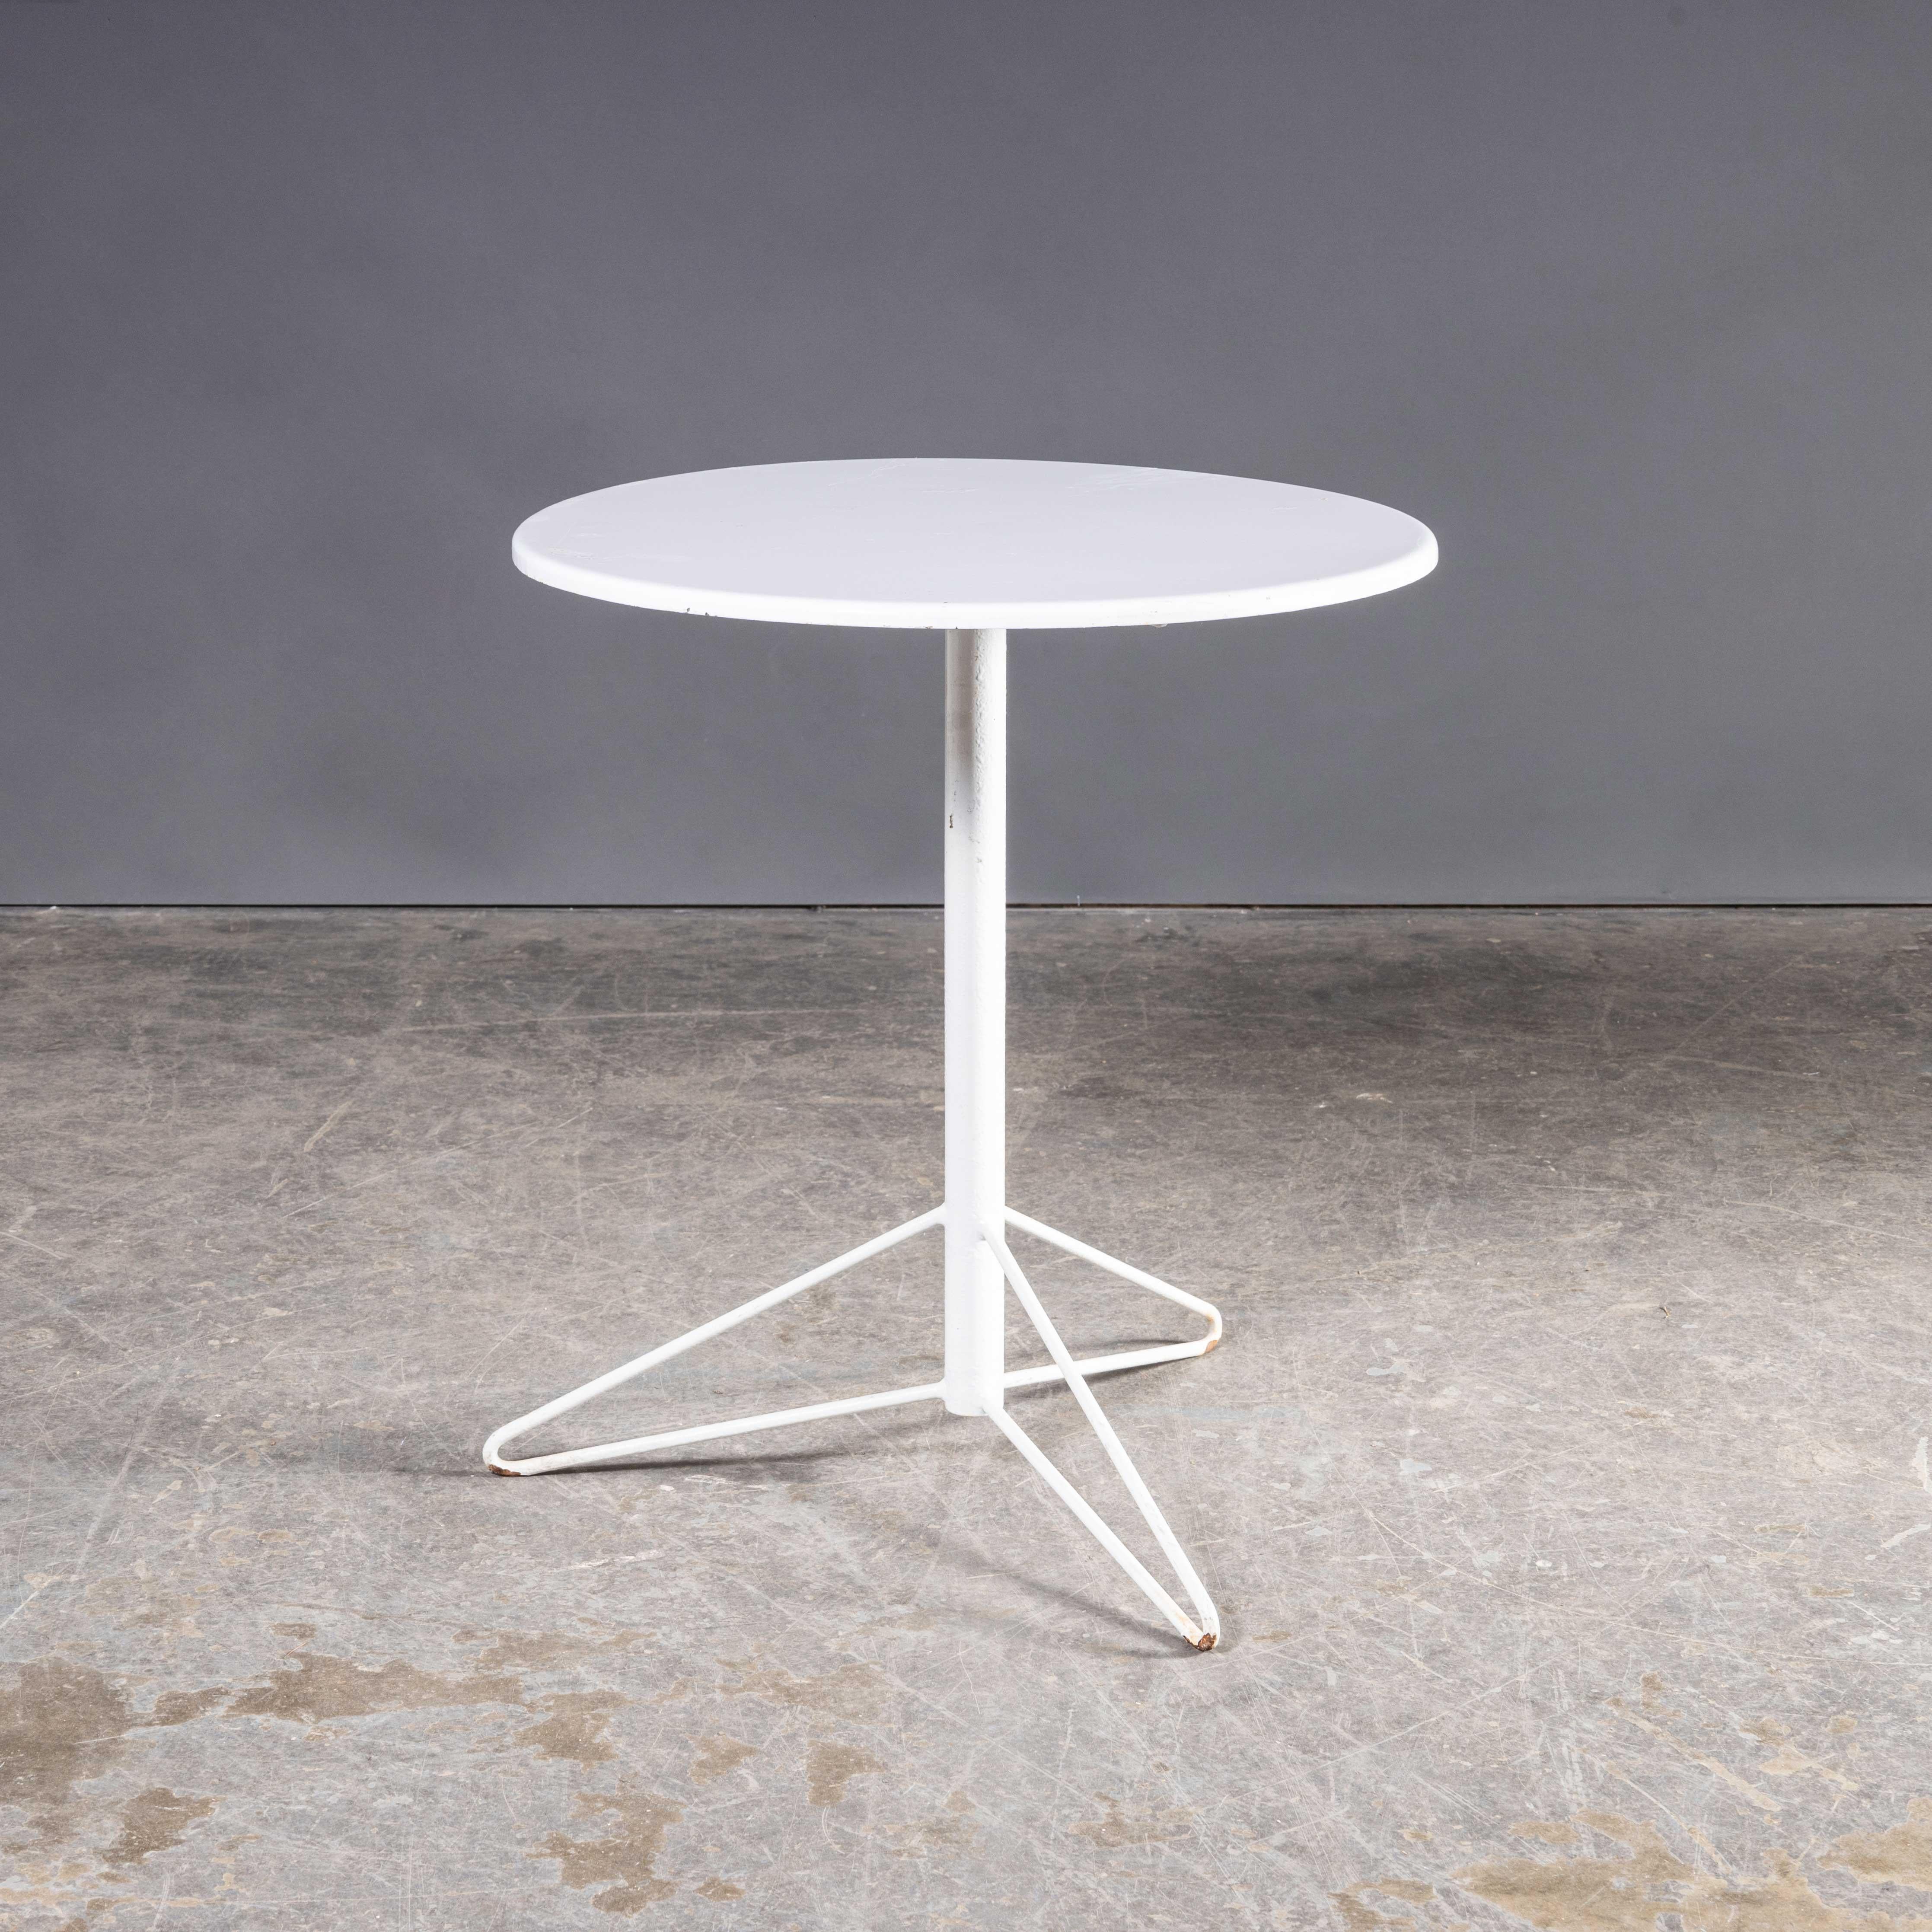 1970’s Egon Eiremann House in Baden Baden White Metal Tables
1970’s French Original White Outdoor Metal Dining Tables – Large Quantity Available. We sourced these chairs from the Egon Eiremann house in Baden Baden, Germany. Egon Eiremann was one of